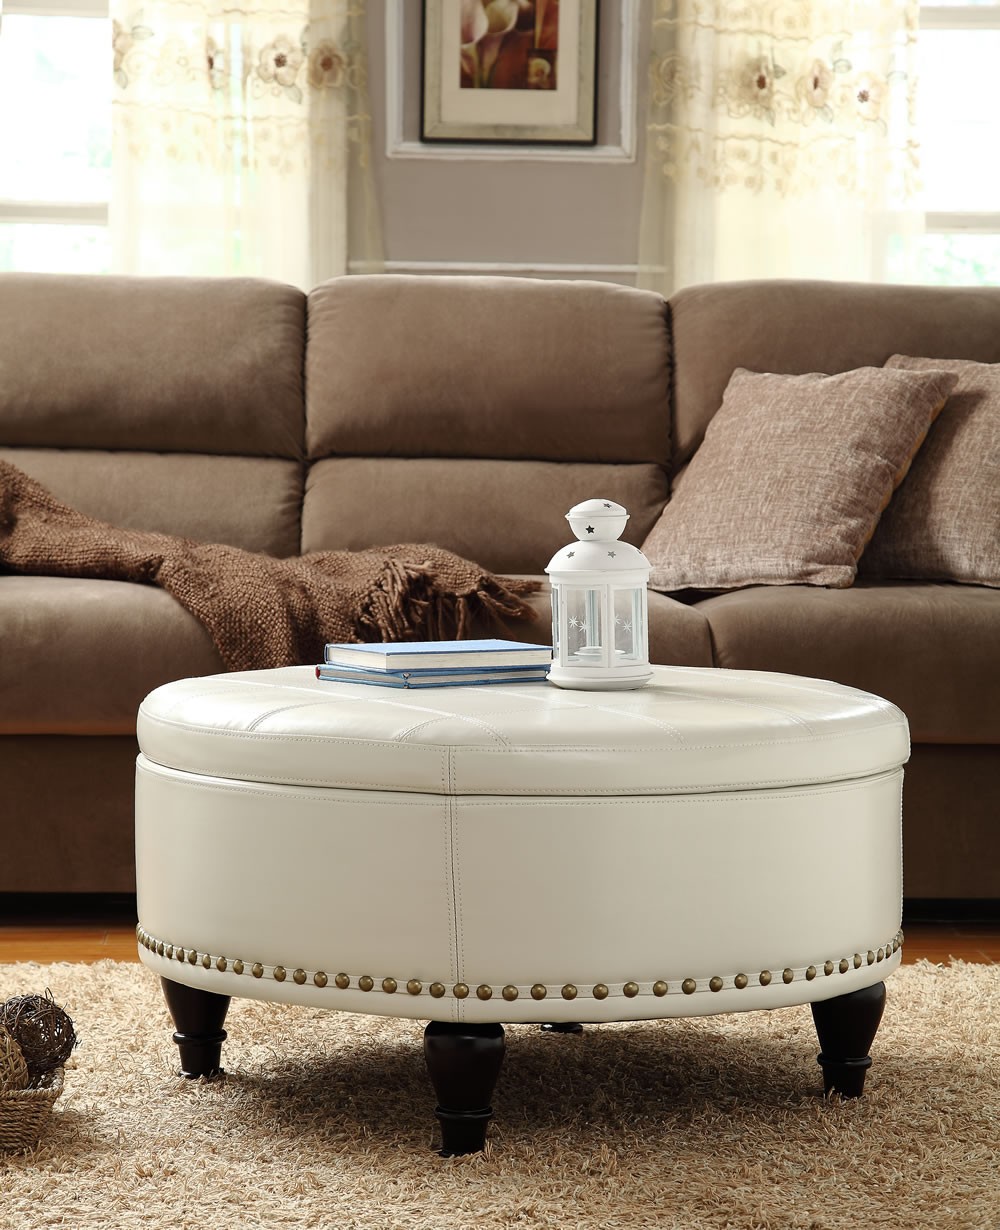 Ottoman As Coffee Table Will Be The Perfect Decision For Your Interior